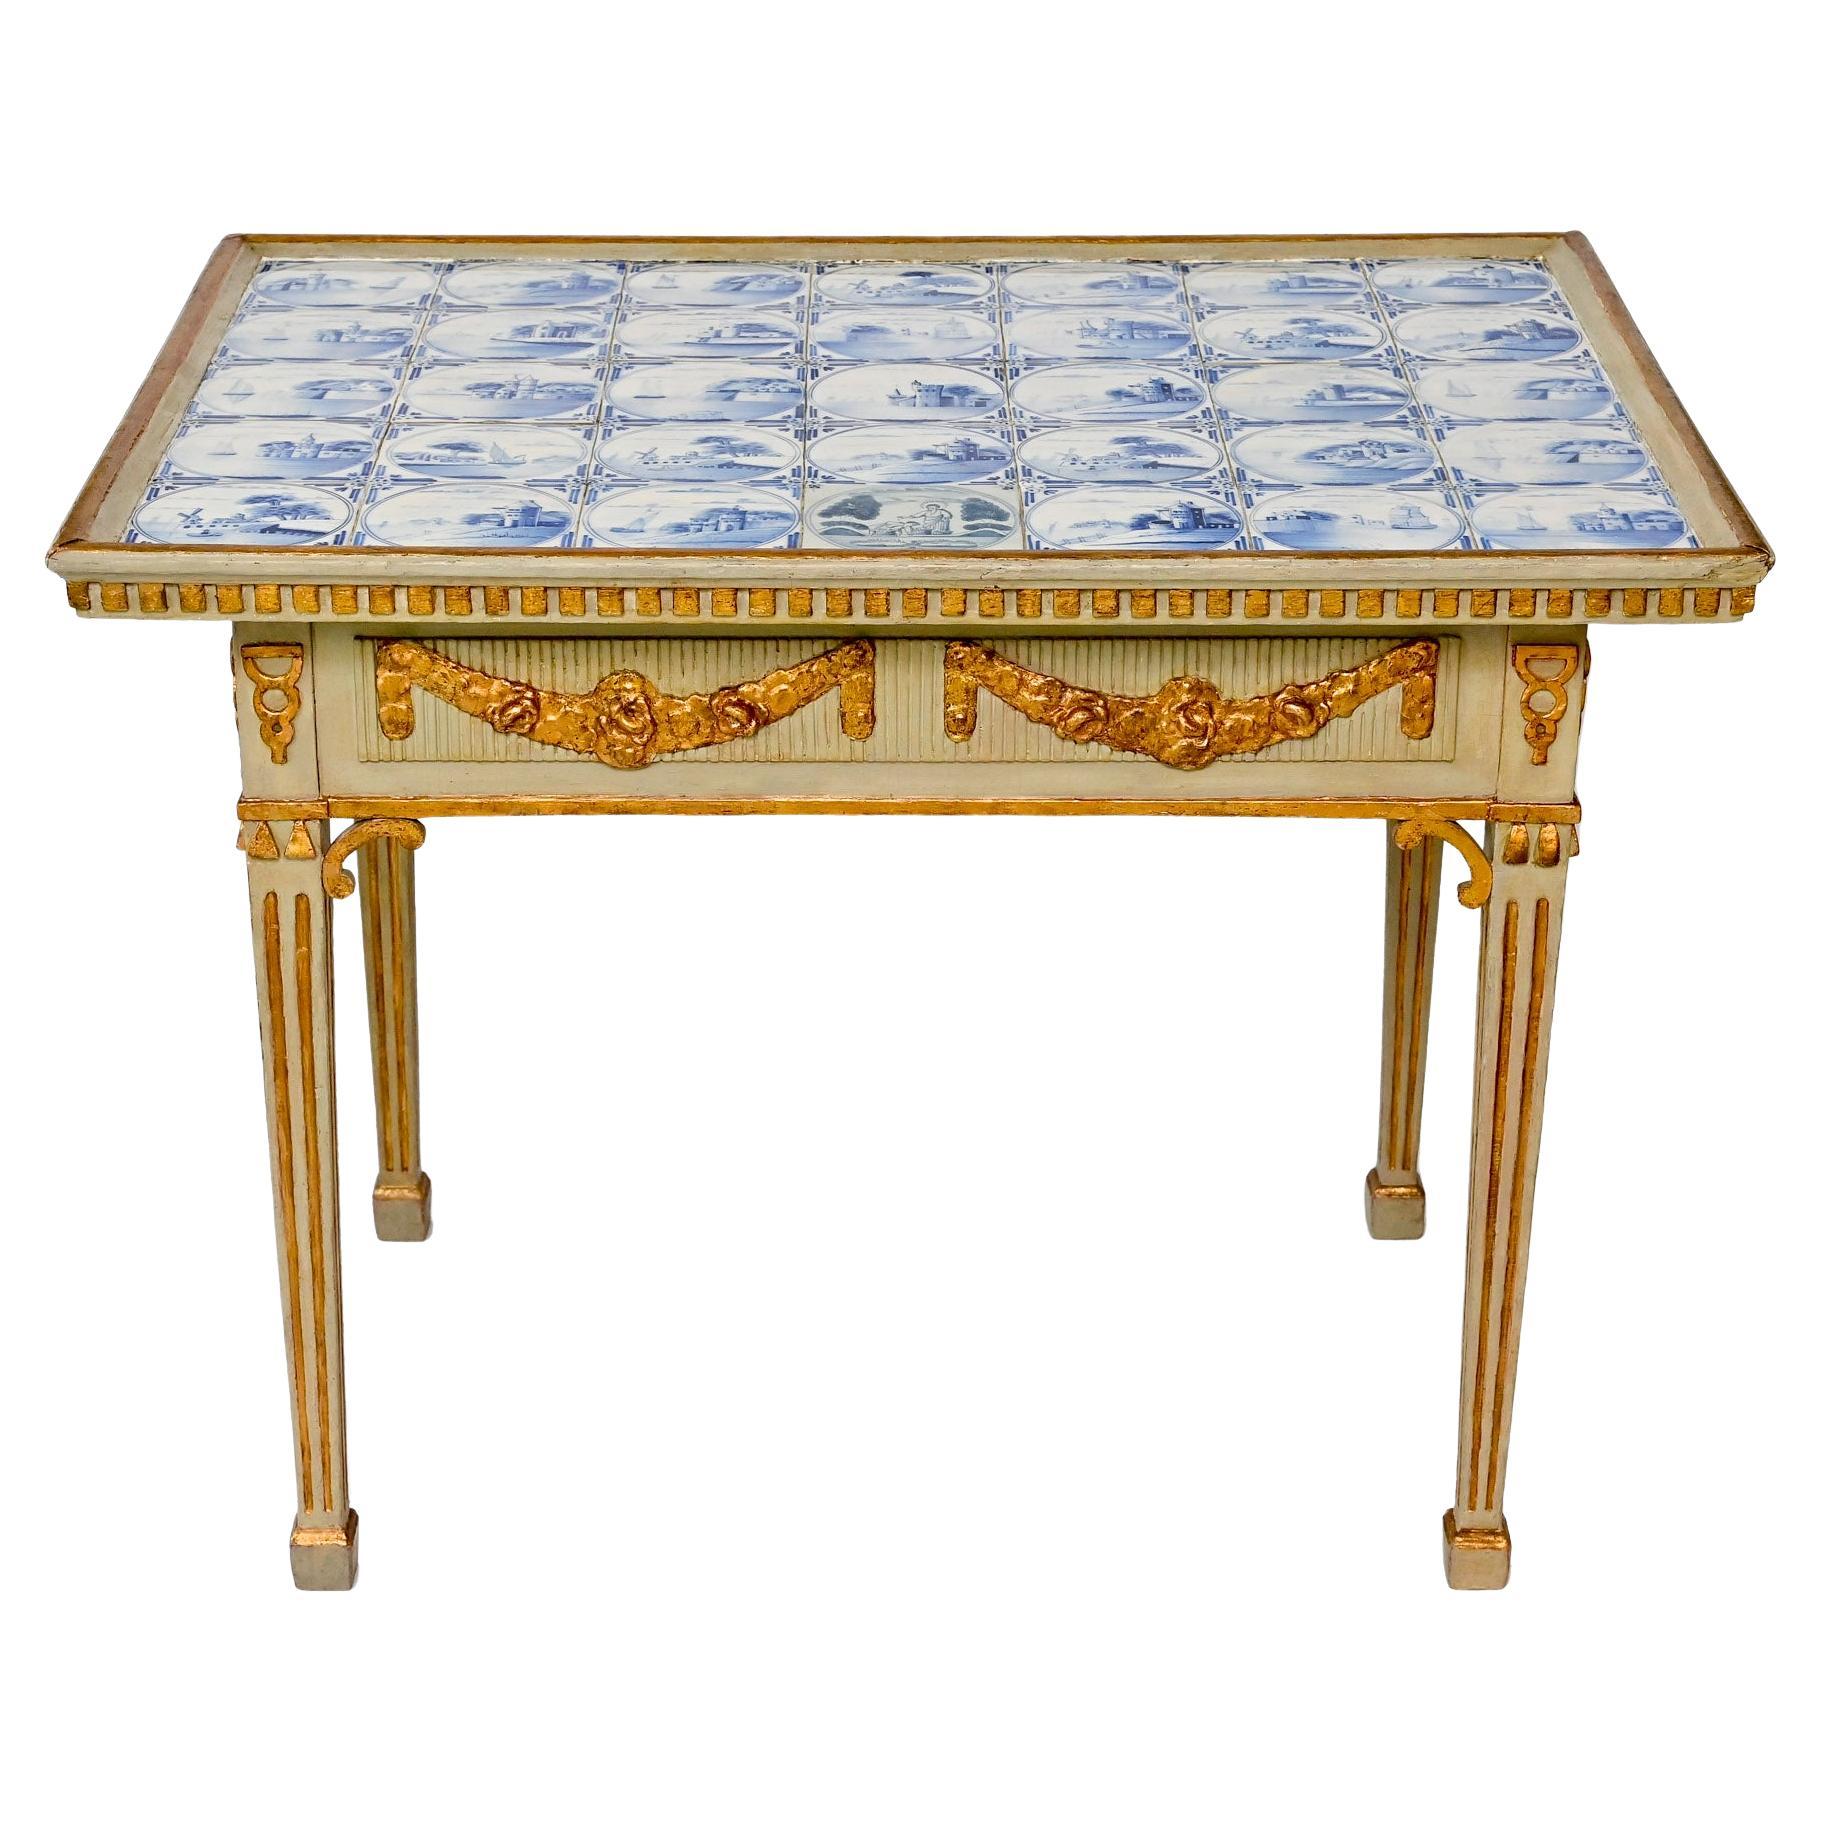 18th Century Table with Delft Tiles Schleswig Holstein Gray and Gilding For Sale